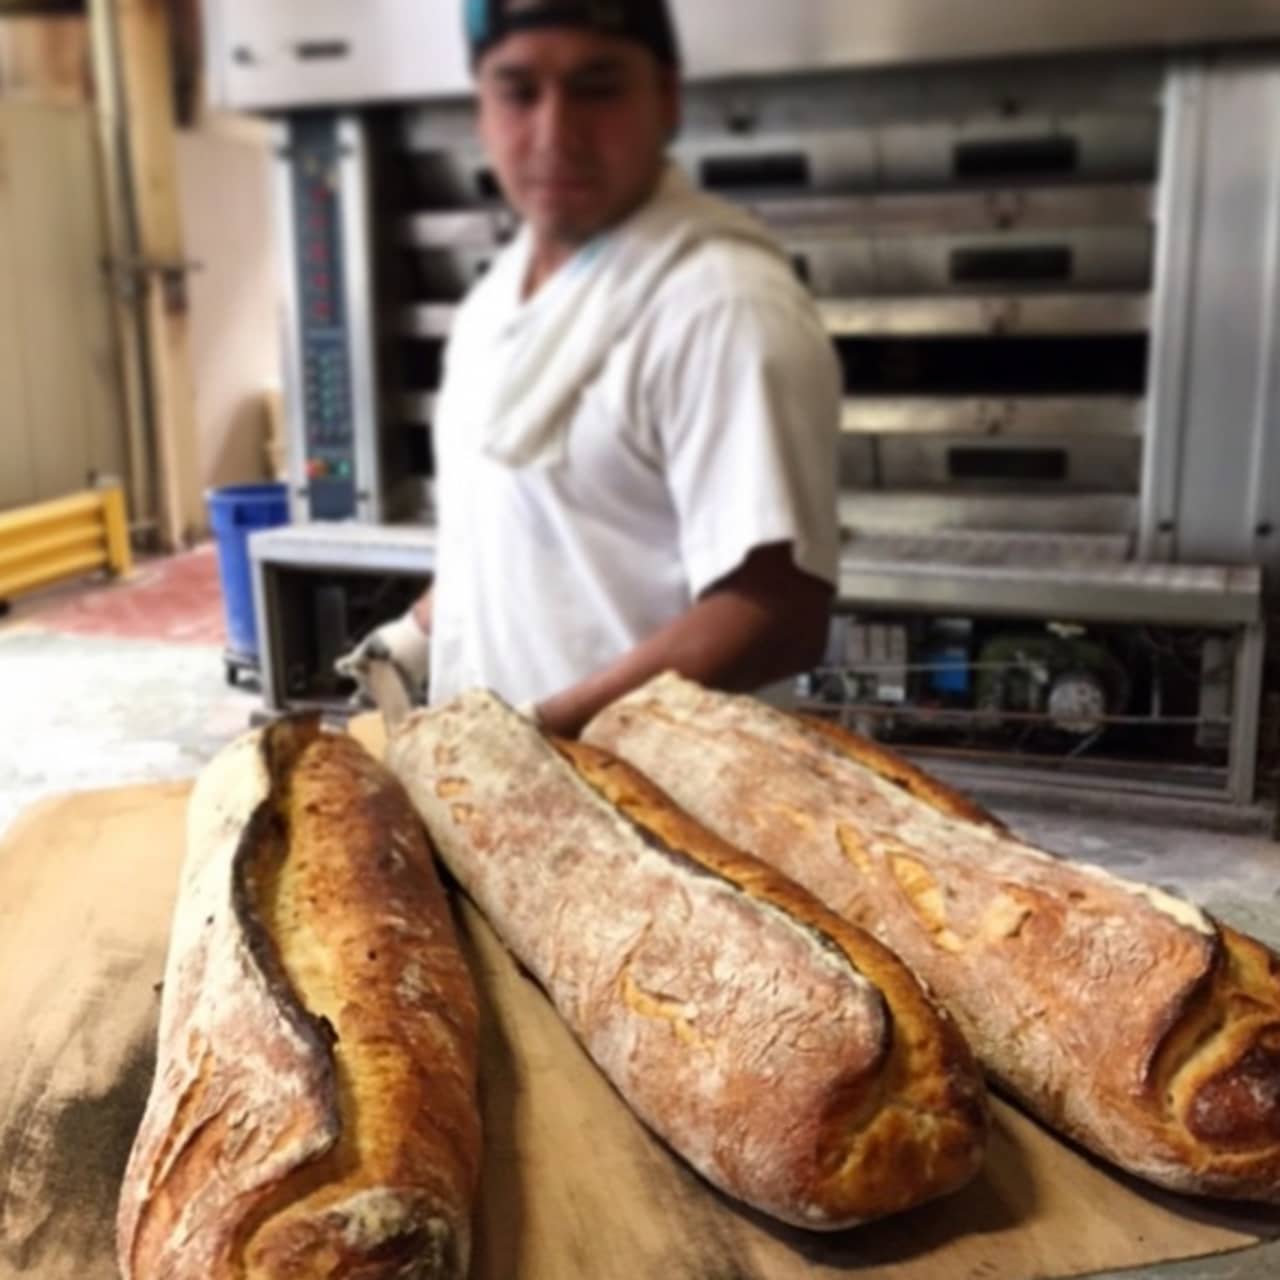 Balthazar Bakery is donating bread for the nature center's upcoming Soup Supper.